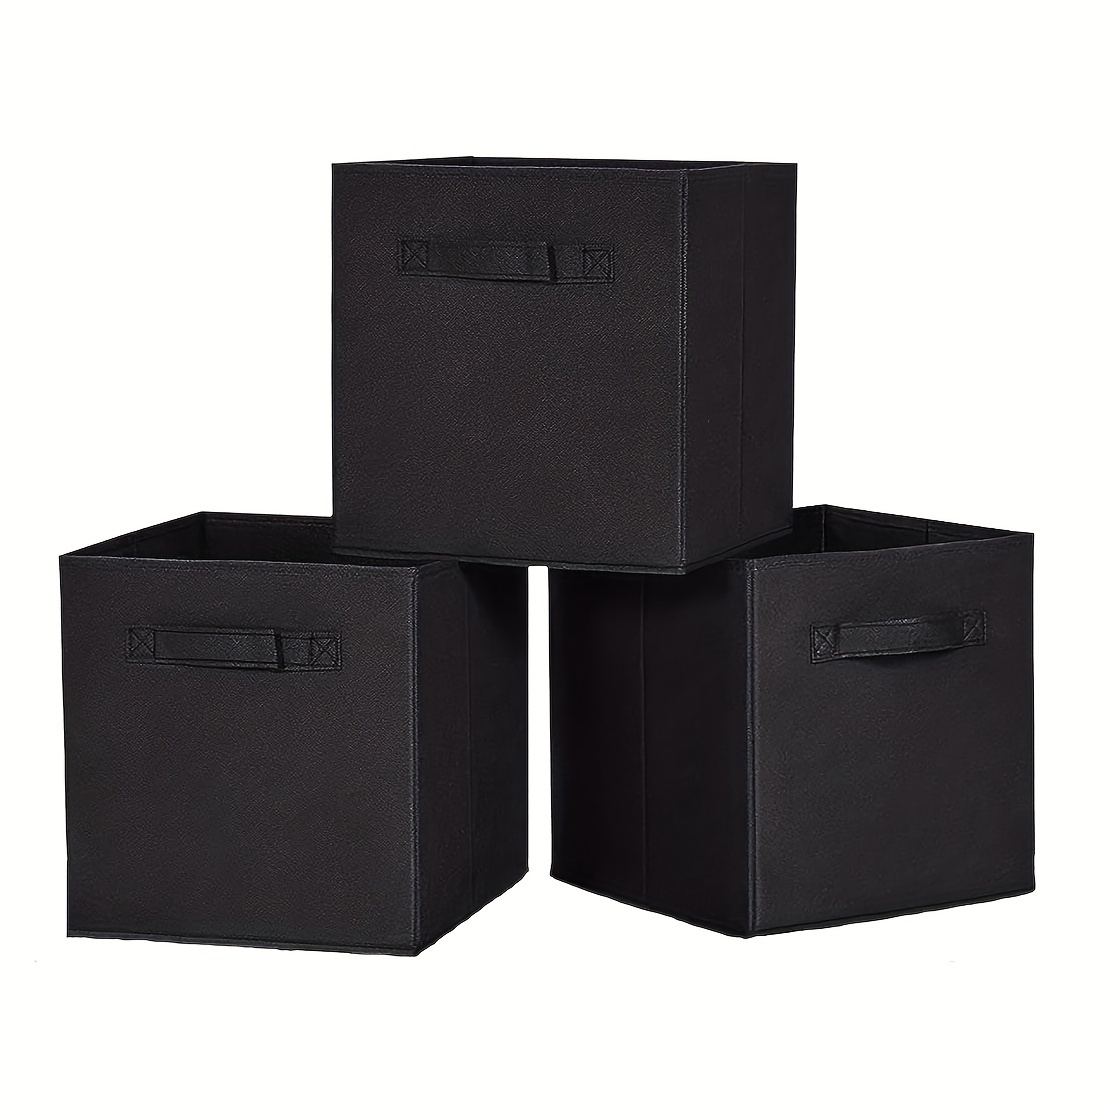 Dropship 6 Pack Fabric Storage Cubes With Handle, Foldable 11 Inch Cube Storage  Bins, Storage Baskets For Shelves, Storage Boxes For Organizing Closet Bins,Black  to Sell Online at a Lower Price